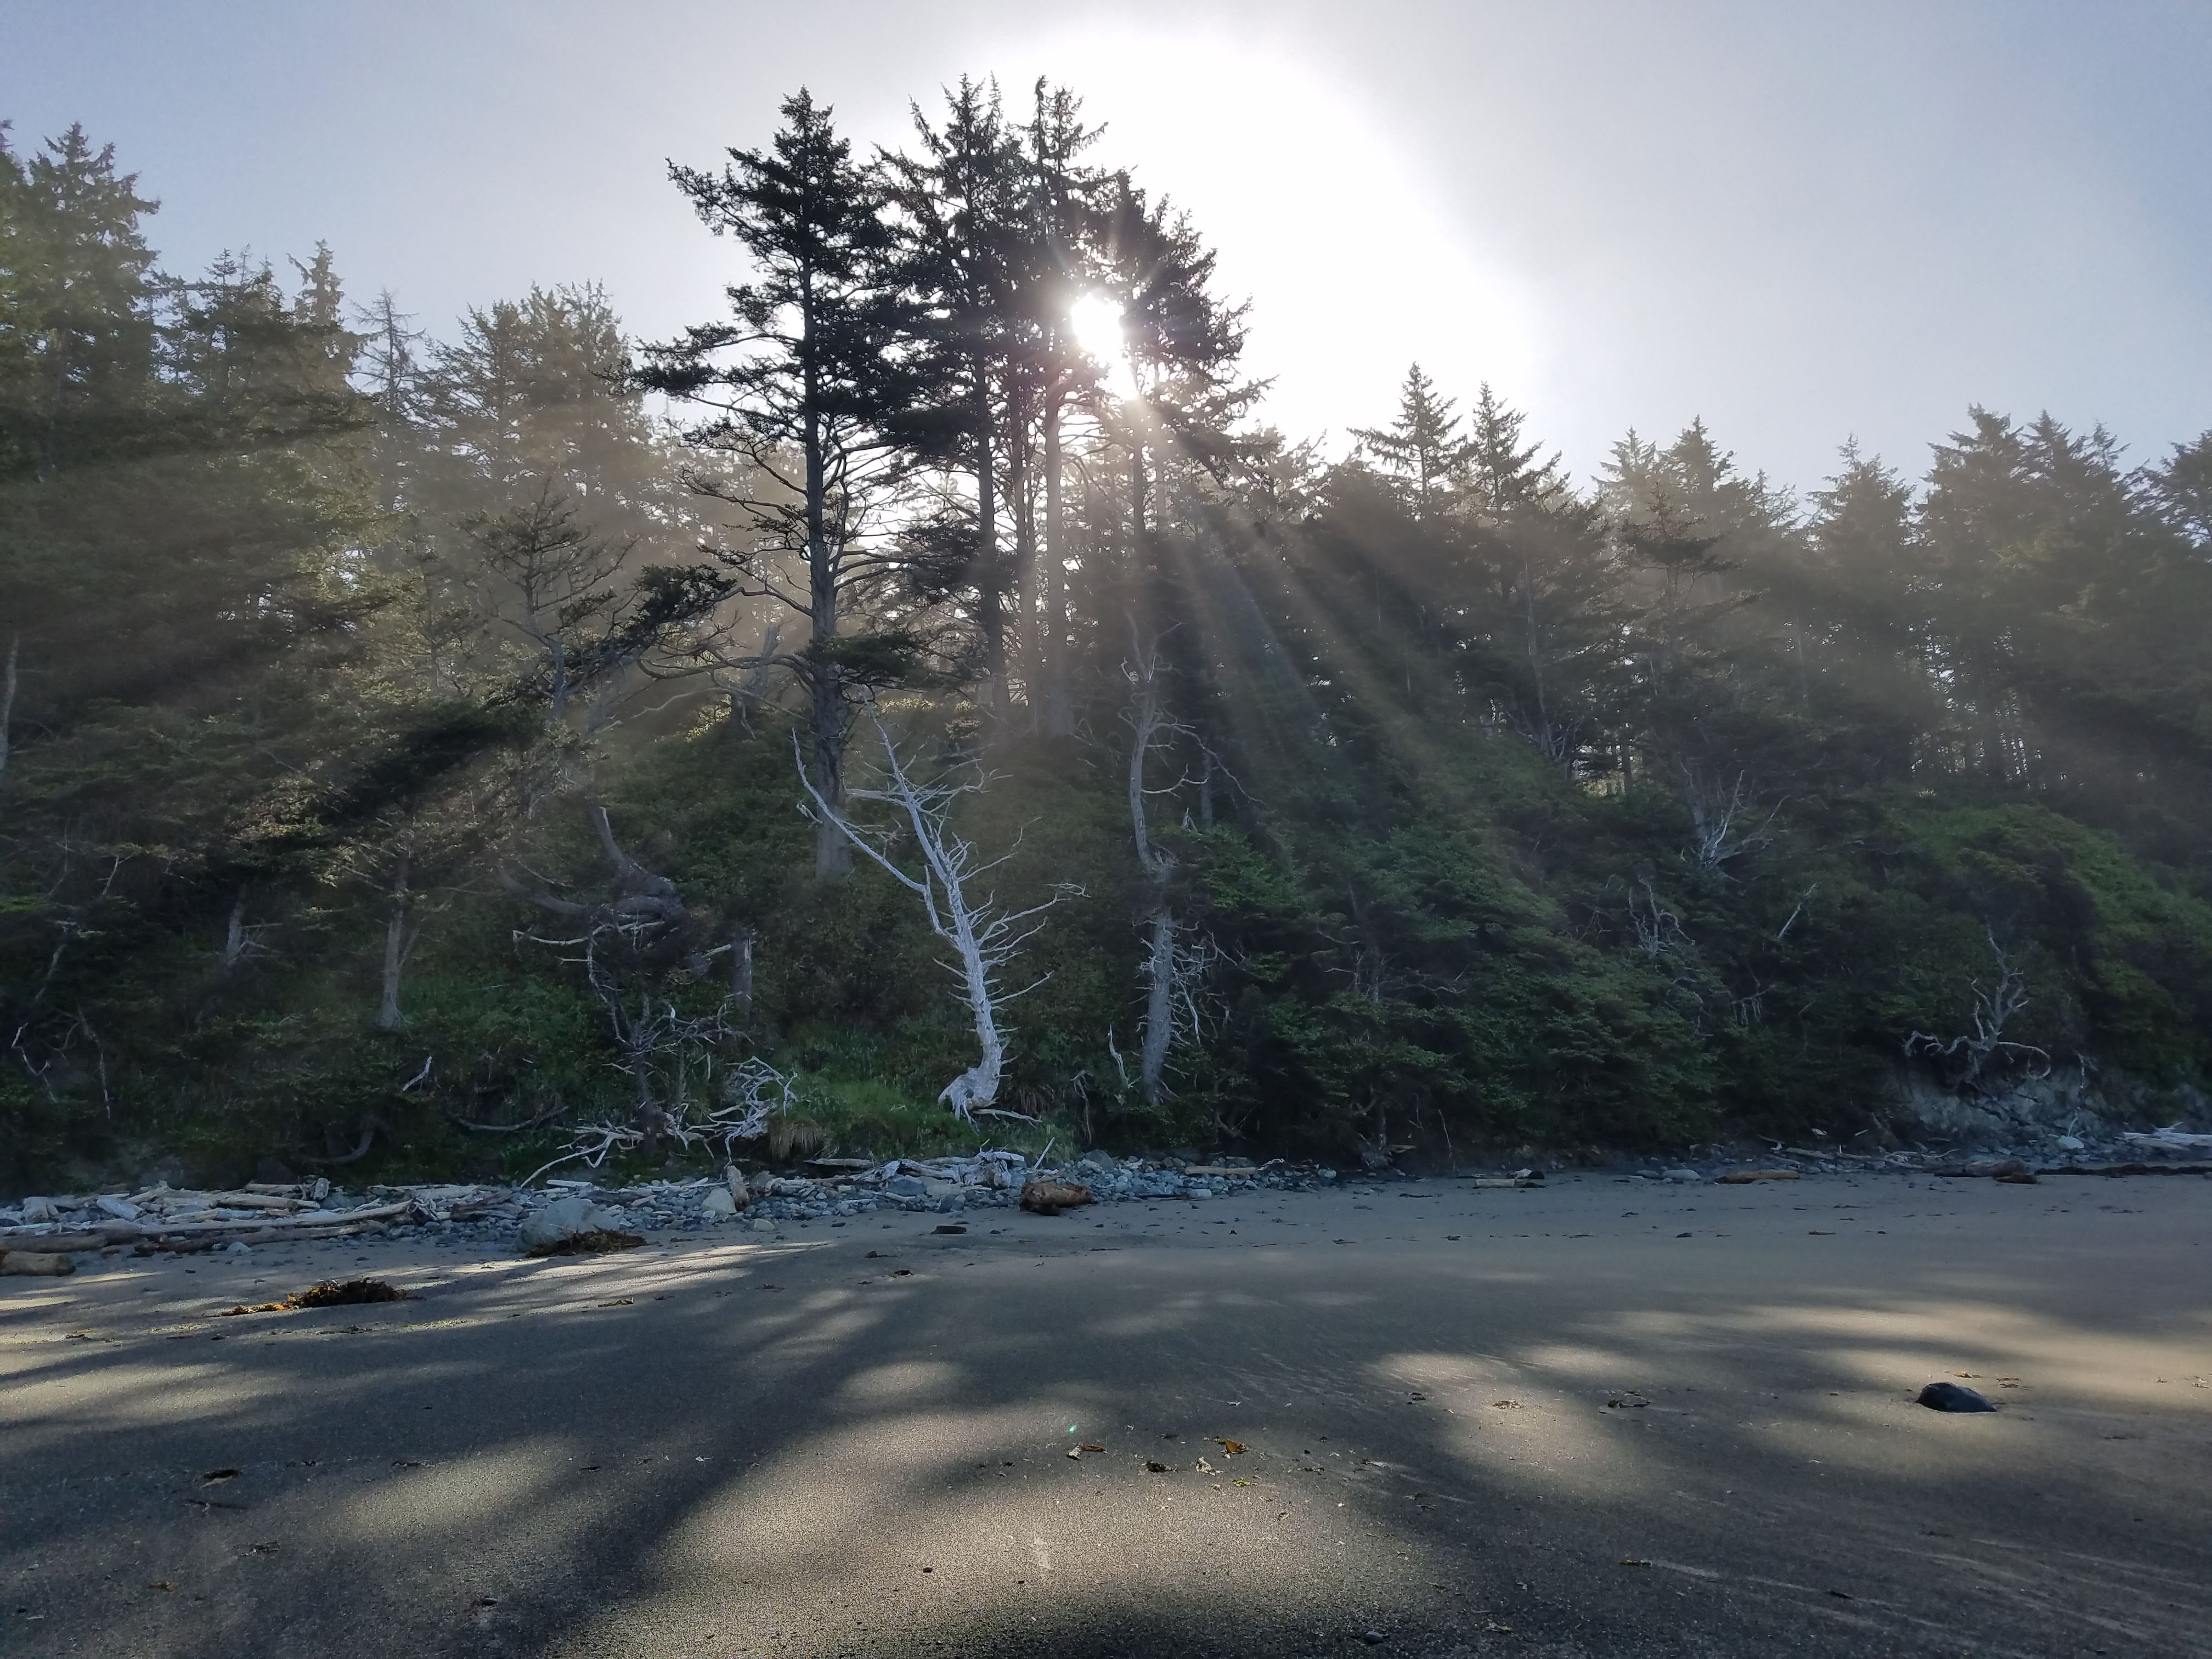 We got going relatively early in order to make our crossings before high tide. The ranger told us the timing of tides this week was perfect for hiking. The morning sunlight through the trees was magical.